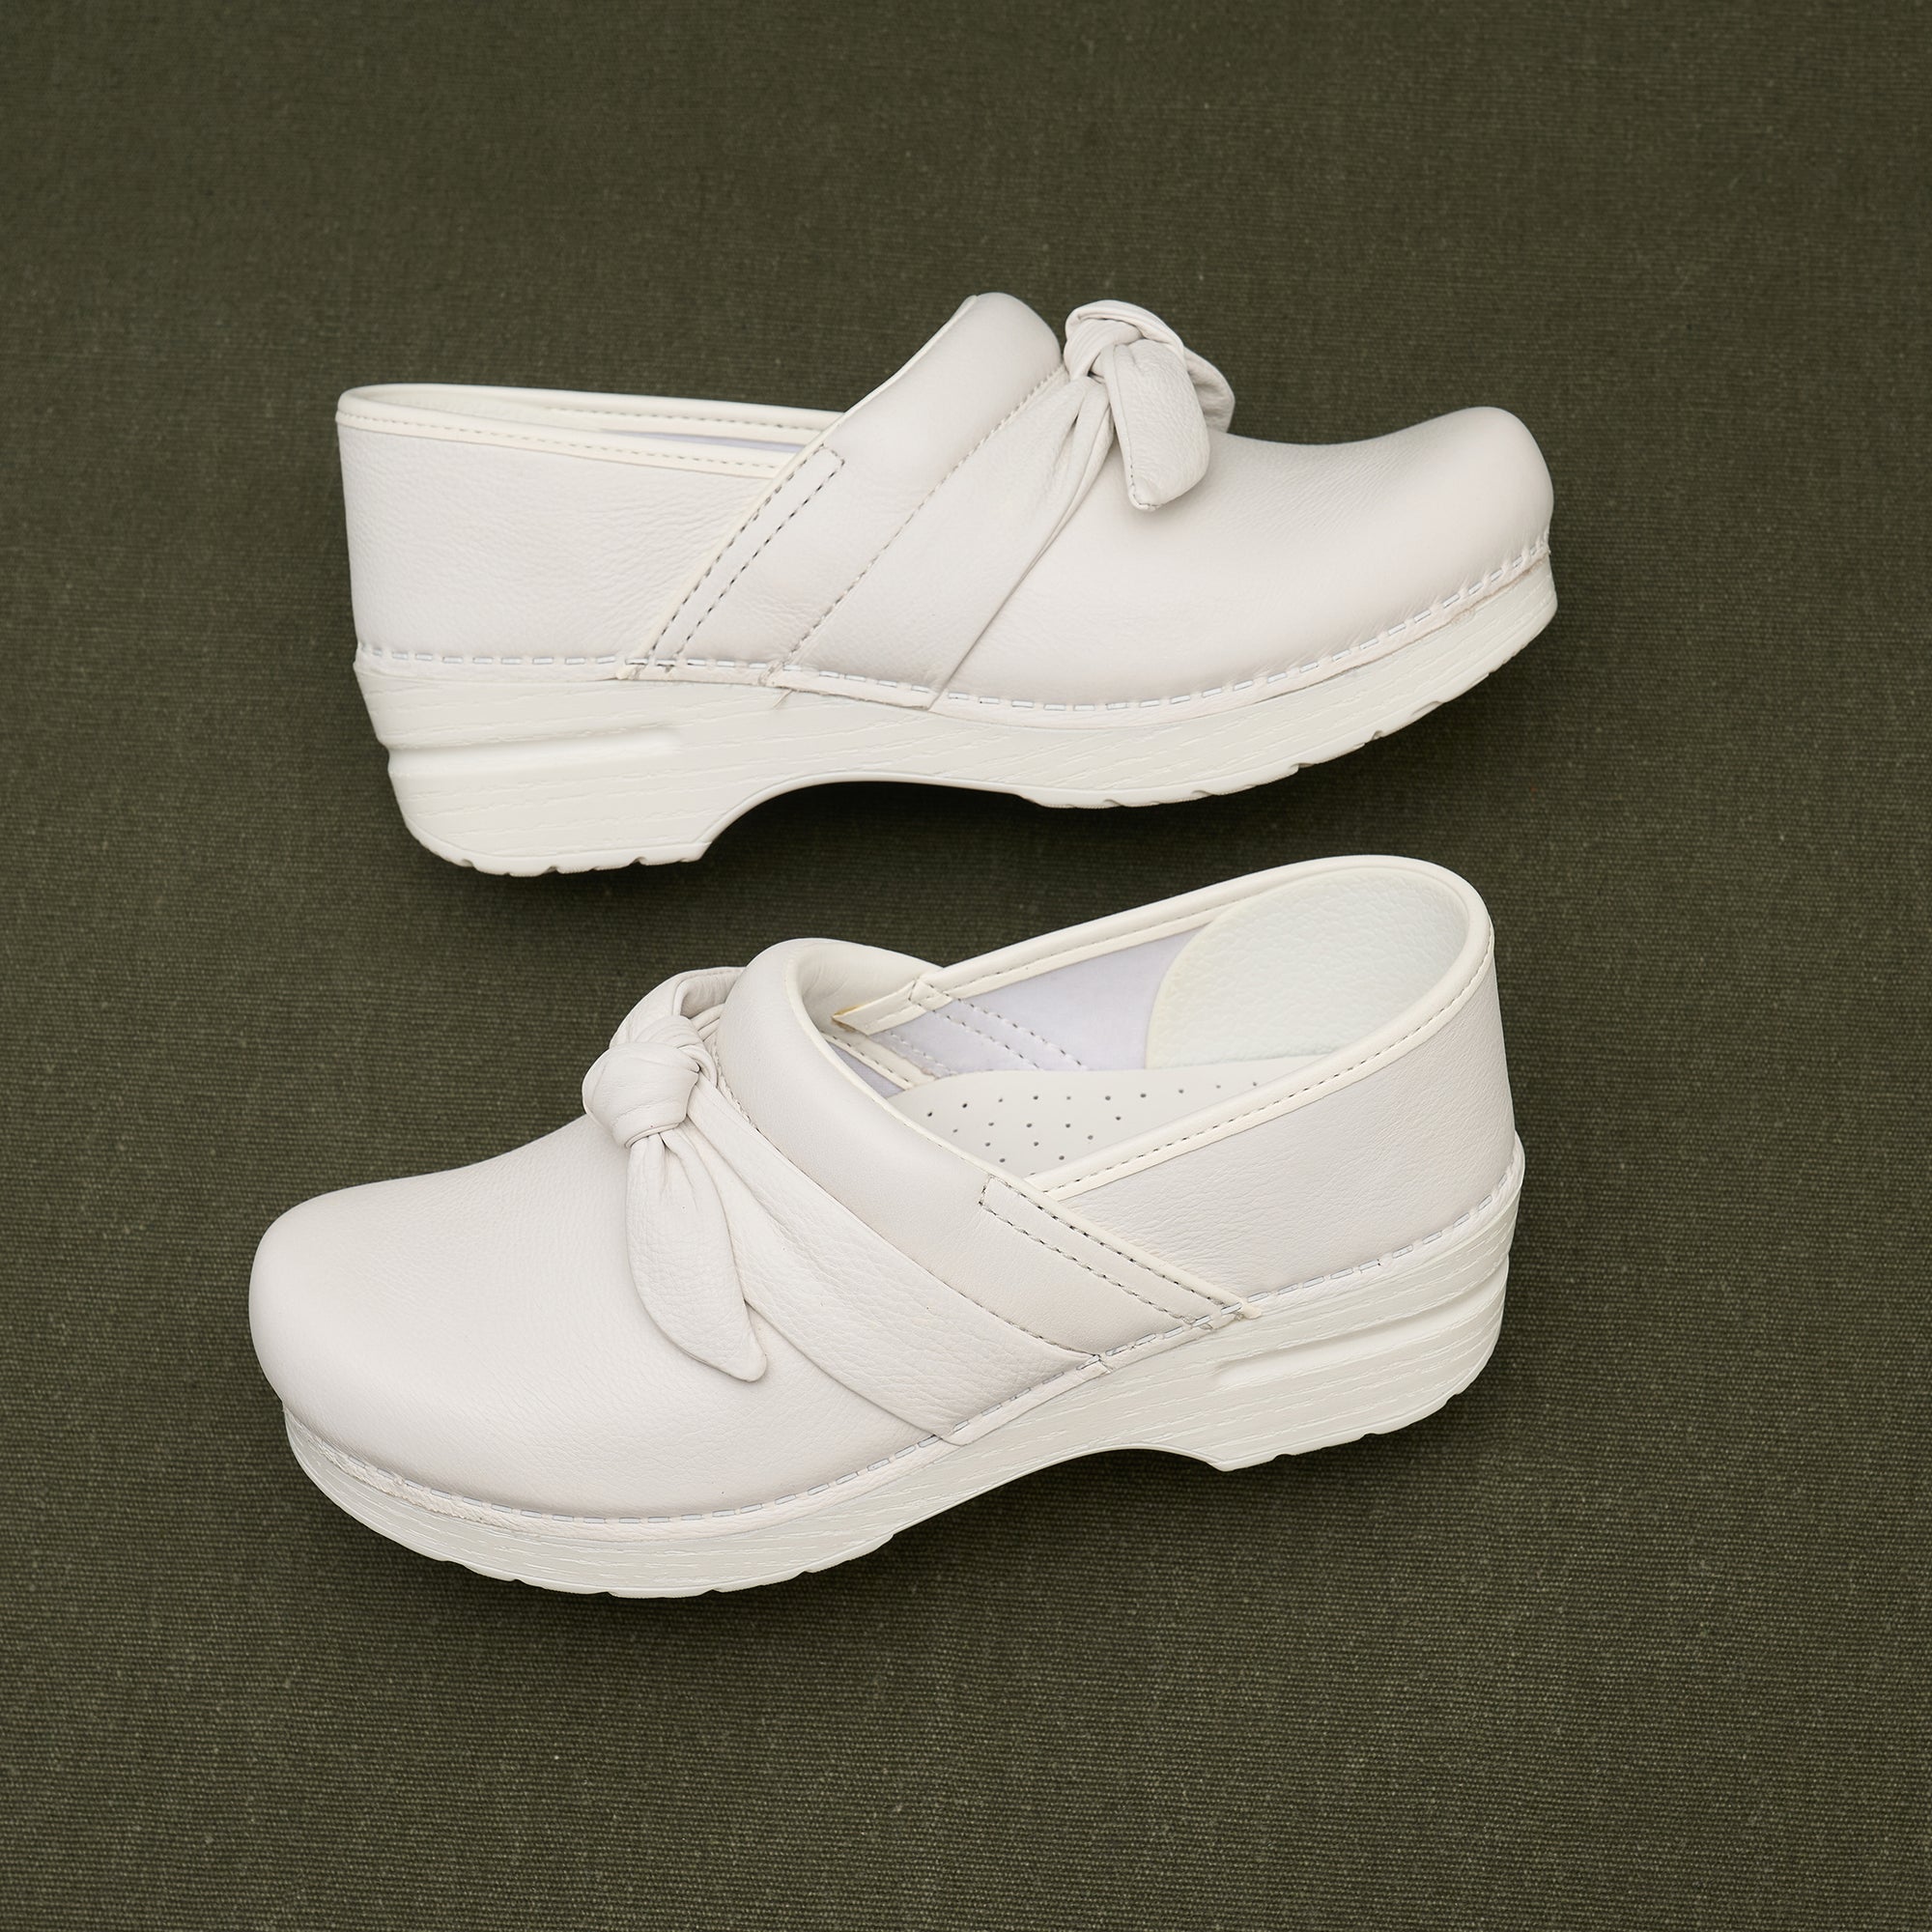 White clogs with a bow design shown against a dark background.